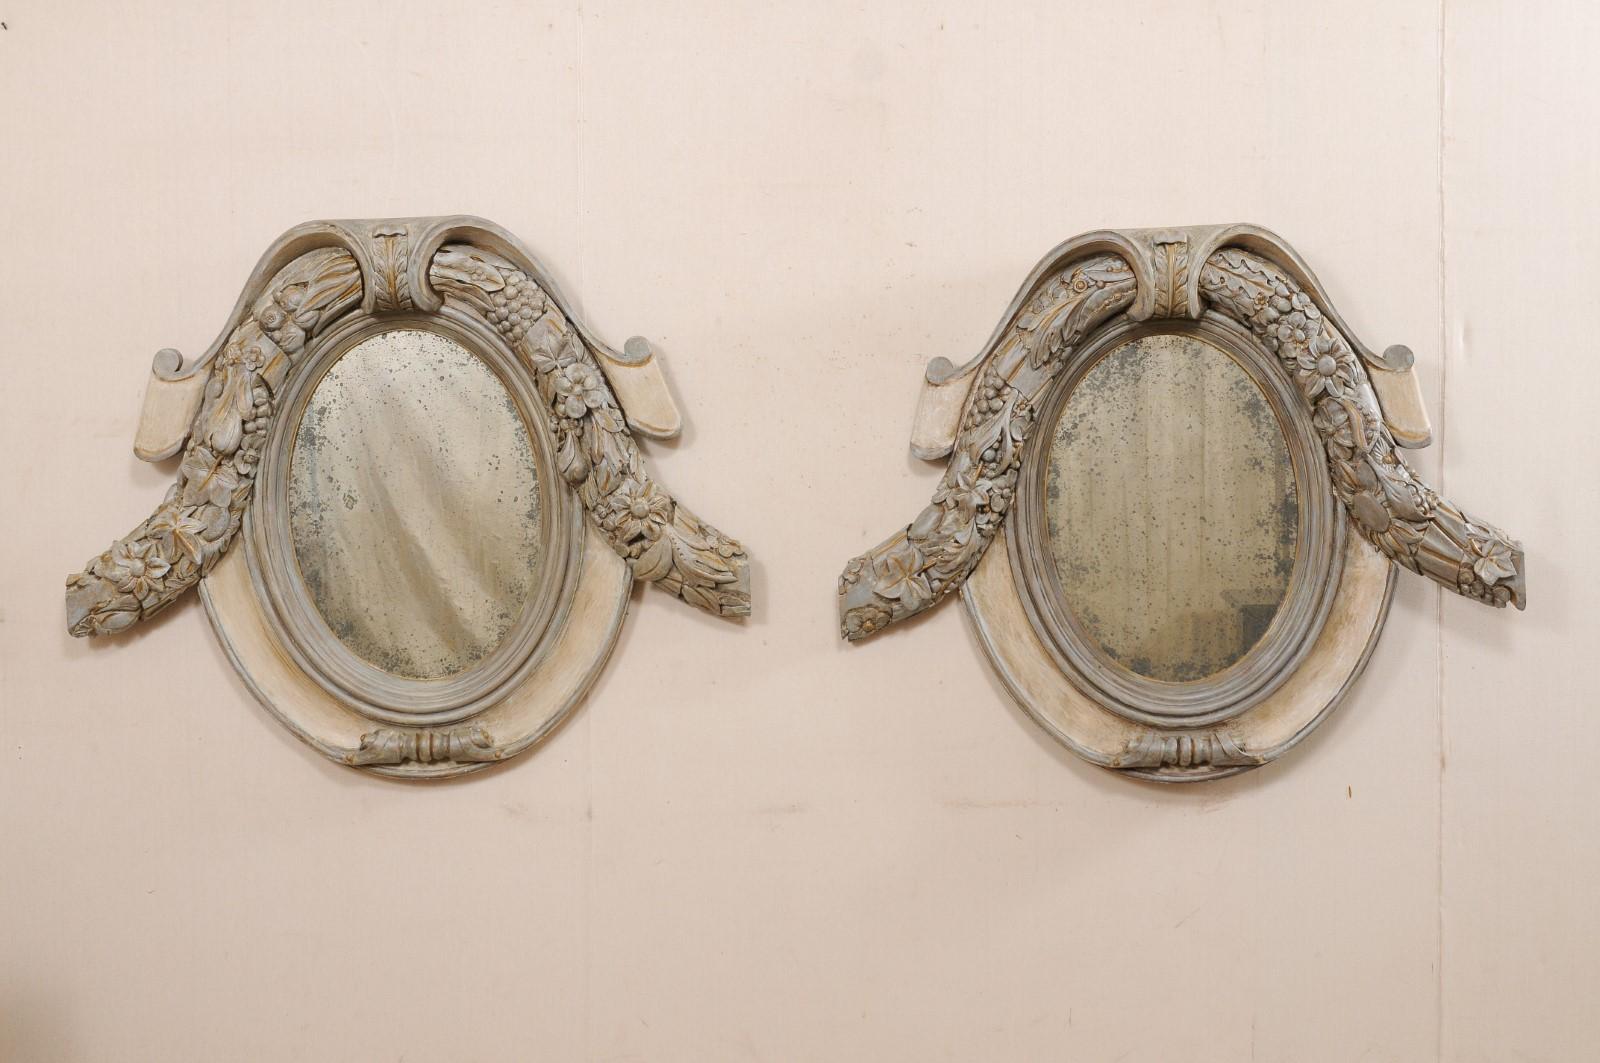 A French pair of cartouche and floral carved mirrors from the early 20th century. This antique pair of mirrors from France have beautifully carved cartouche inspired frames, mostly oval in shape, with a leaf and floral carved swag garland wrapped